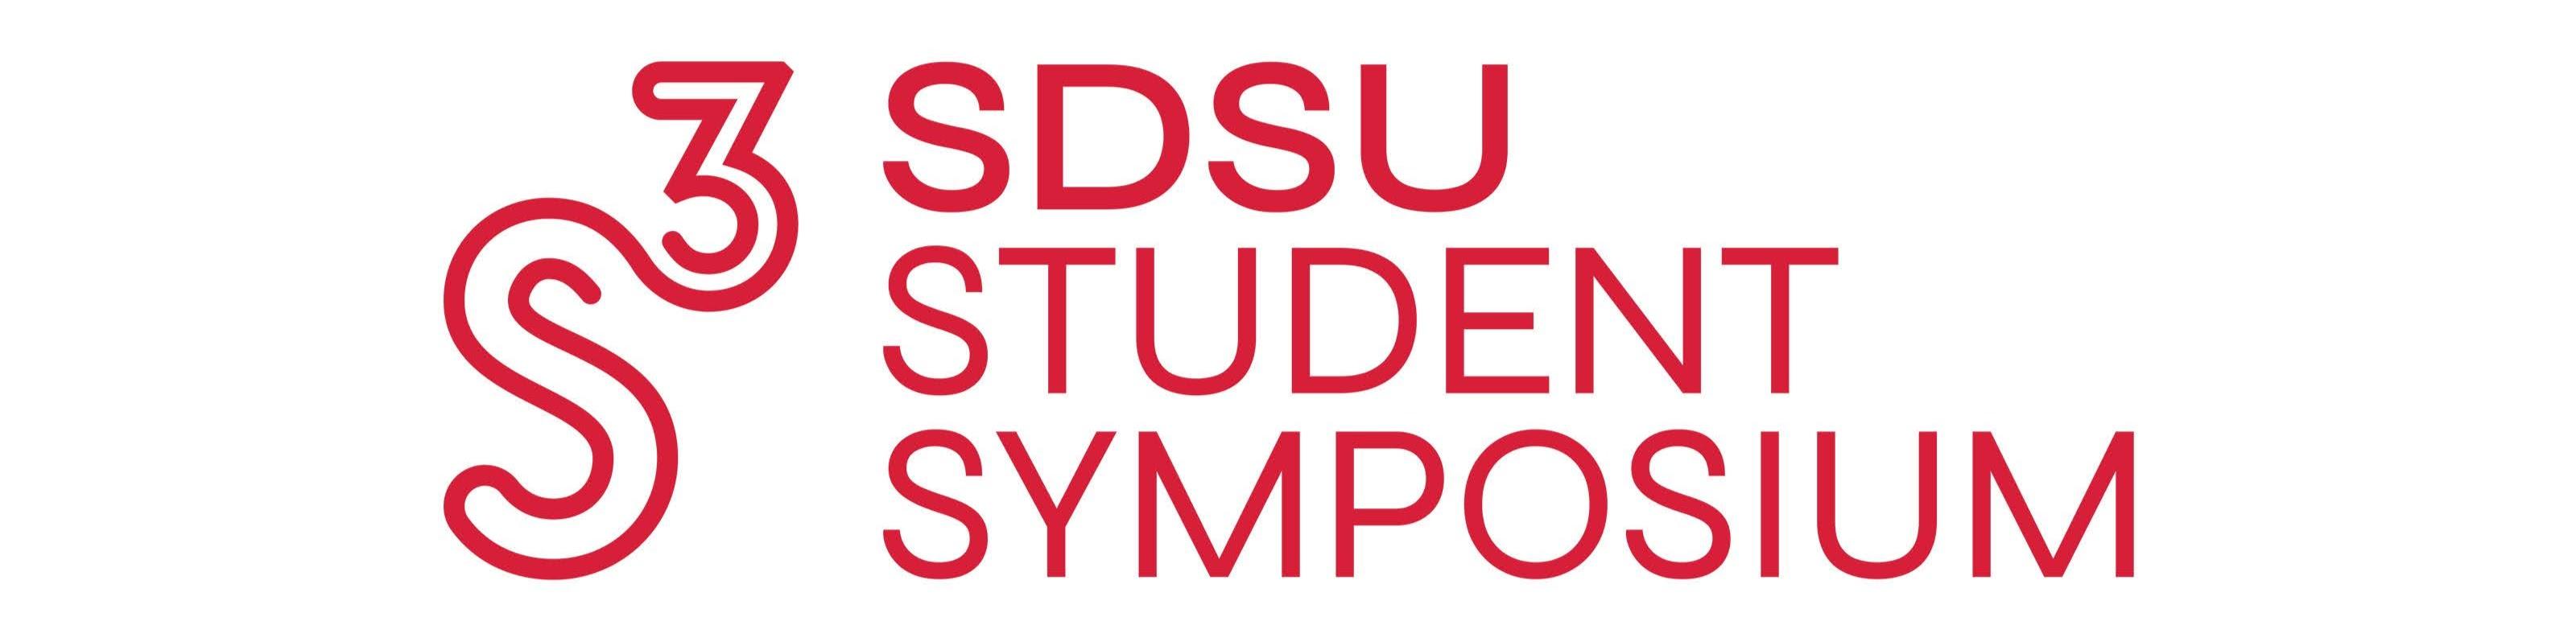 White background with red text that says SDSU Student Symposium and red logo S3